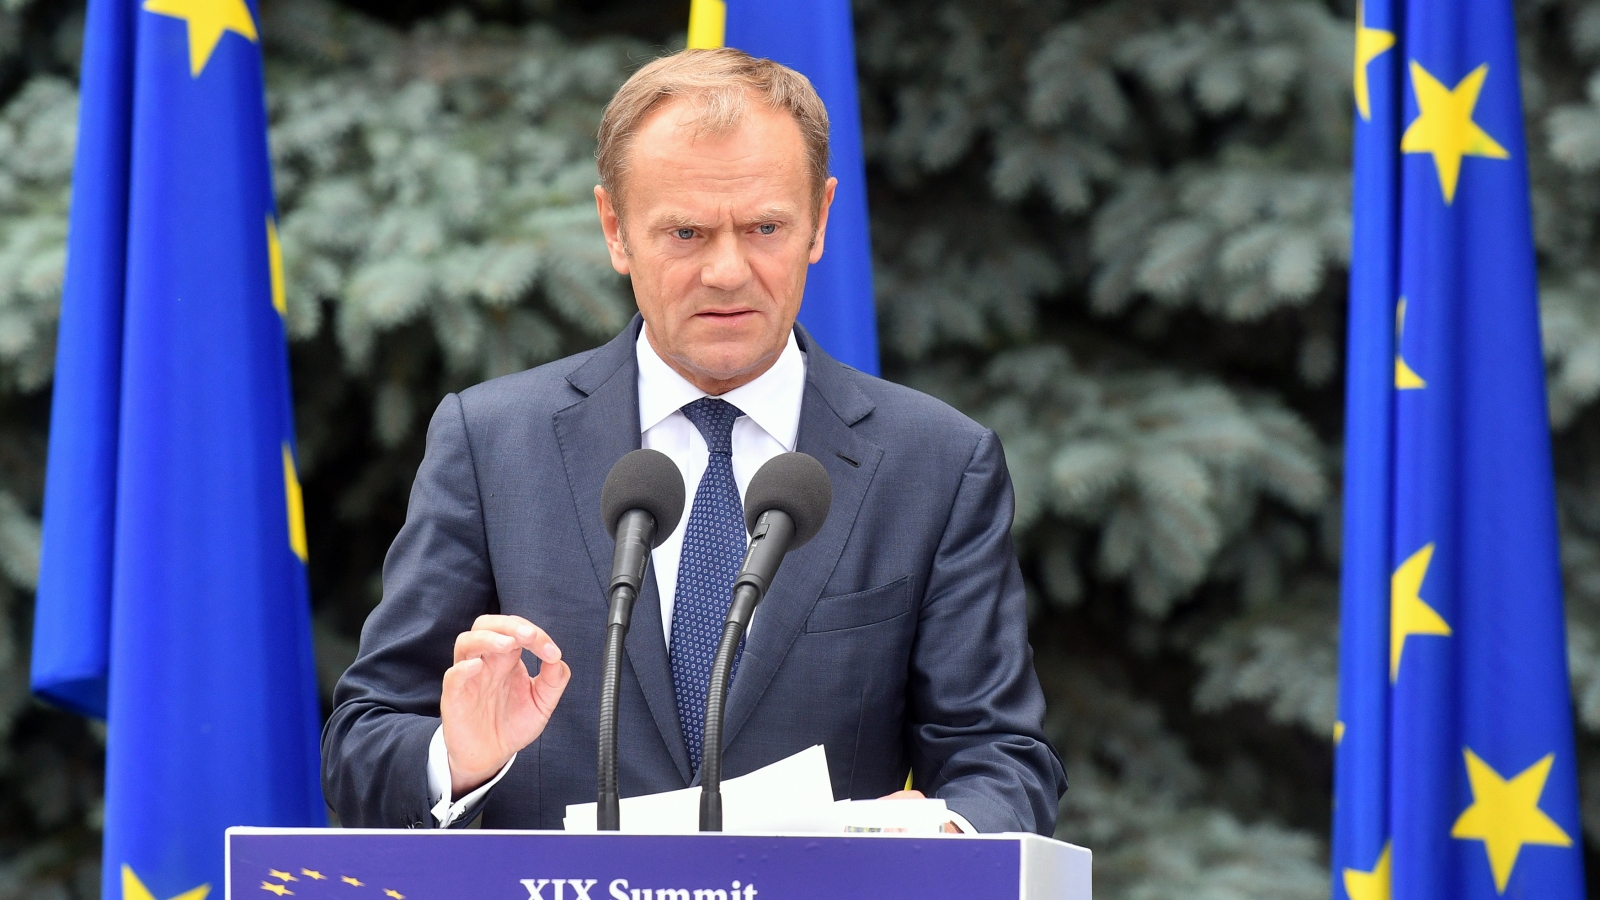 Donald Tusk: EEA brings us together as equal partners in the internal market, giving access to its four freedoms: of goods, persons, services and capital